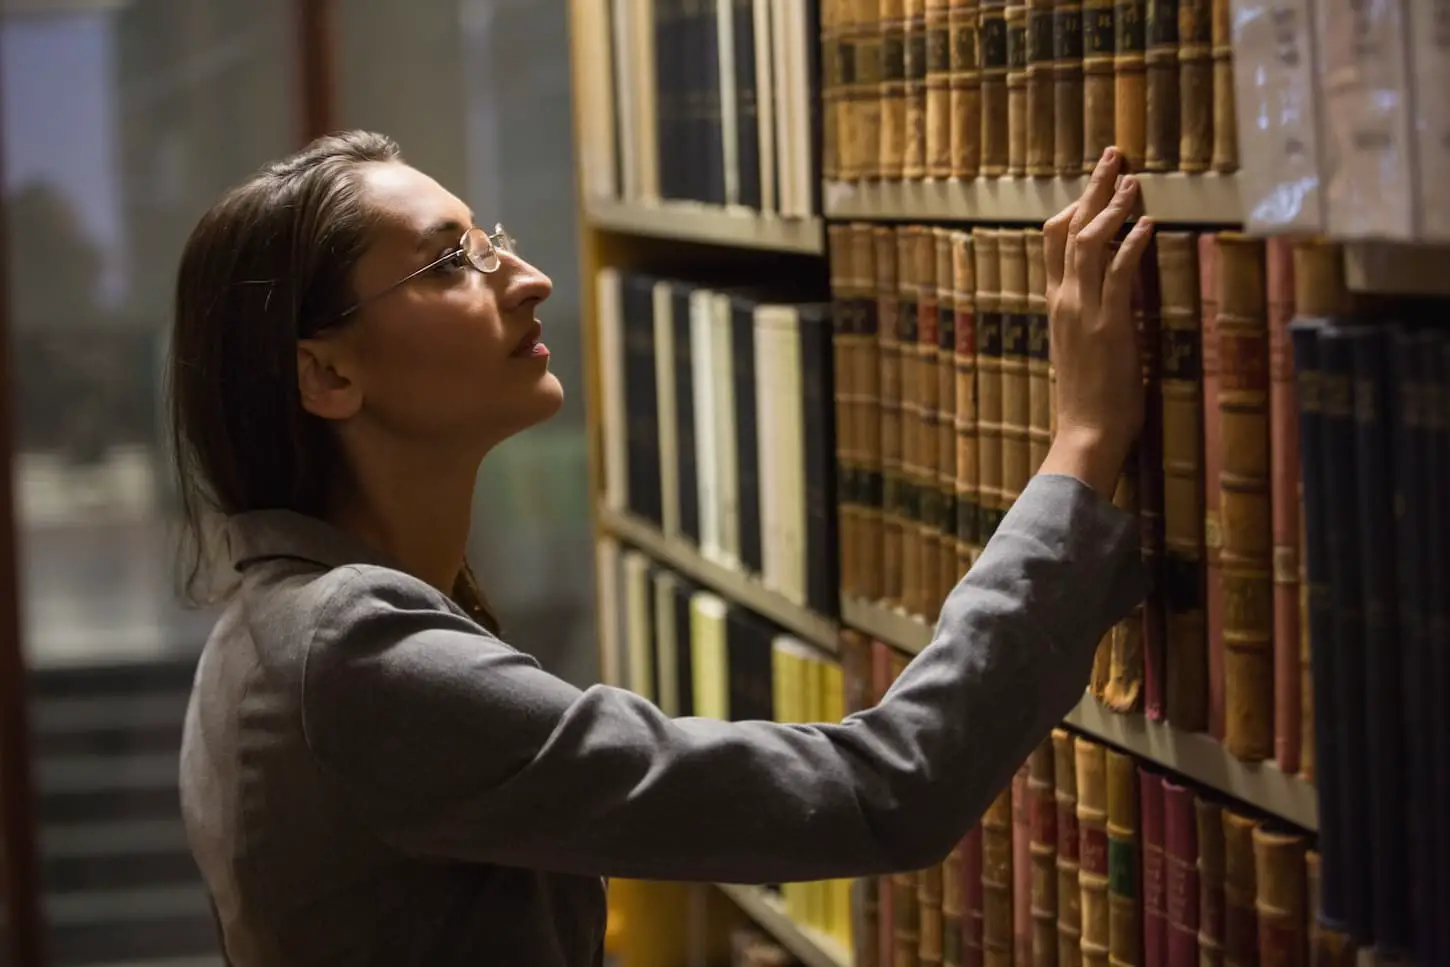 An image of a woman picking a book in the law library at the university.